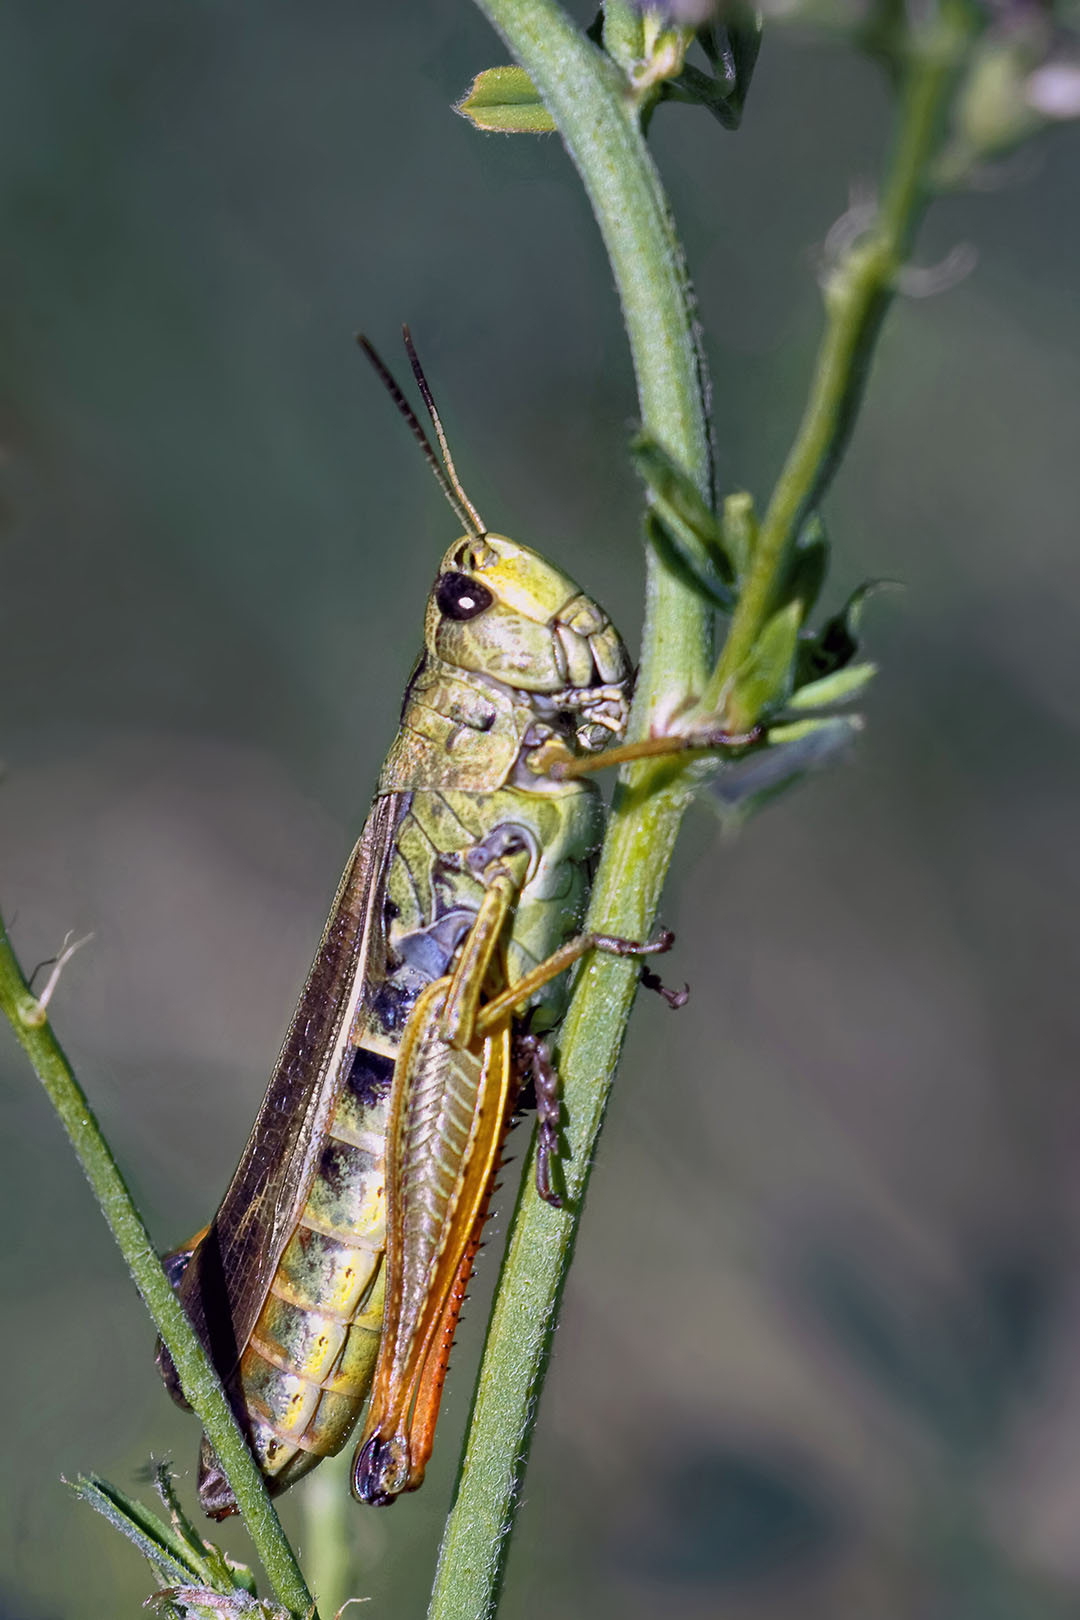 Grasshoppers are rich in crude protein, fat, and fiber and can function as a fishmeal alternative in broiler diets. Photo: Canva